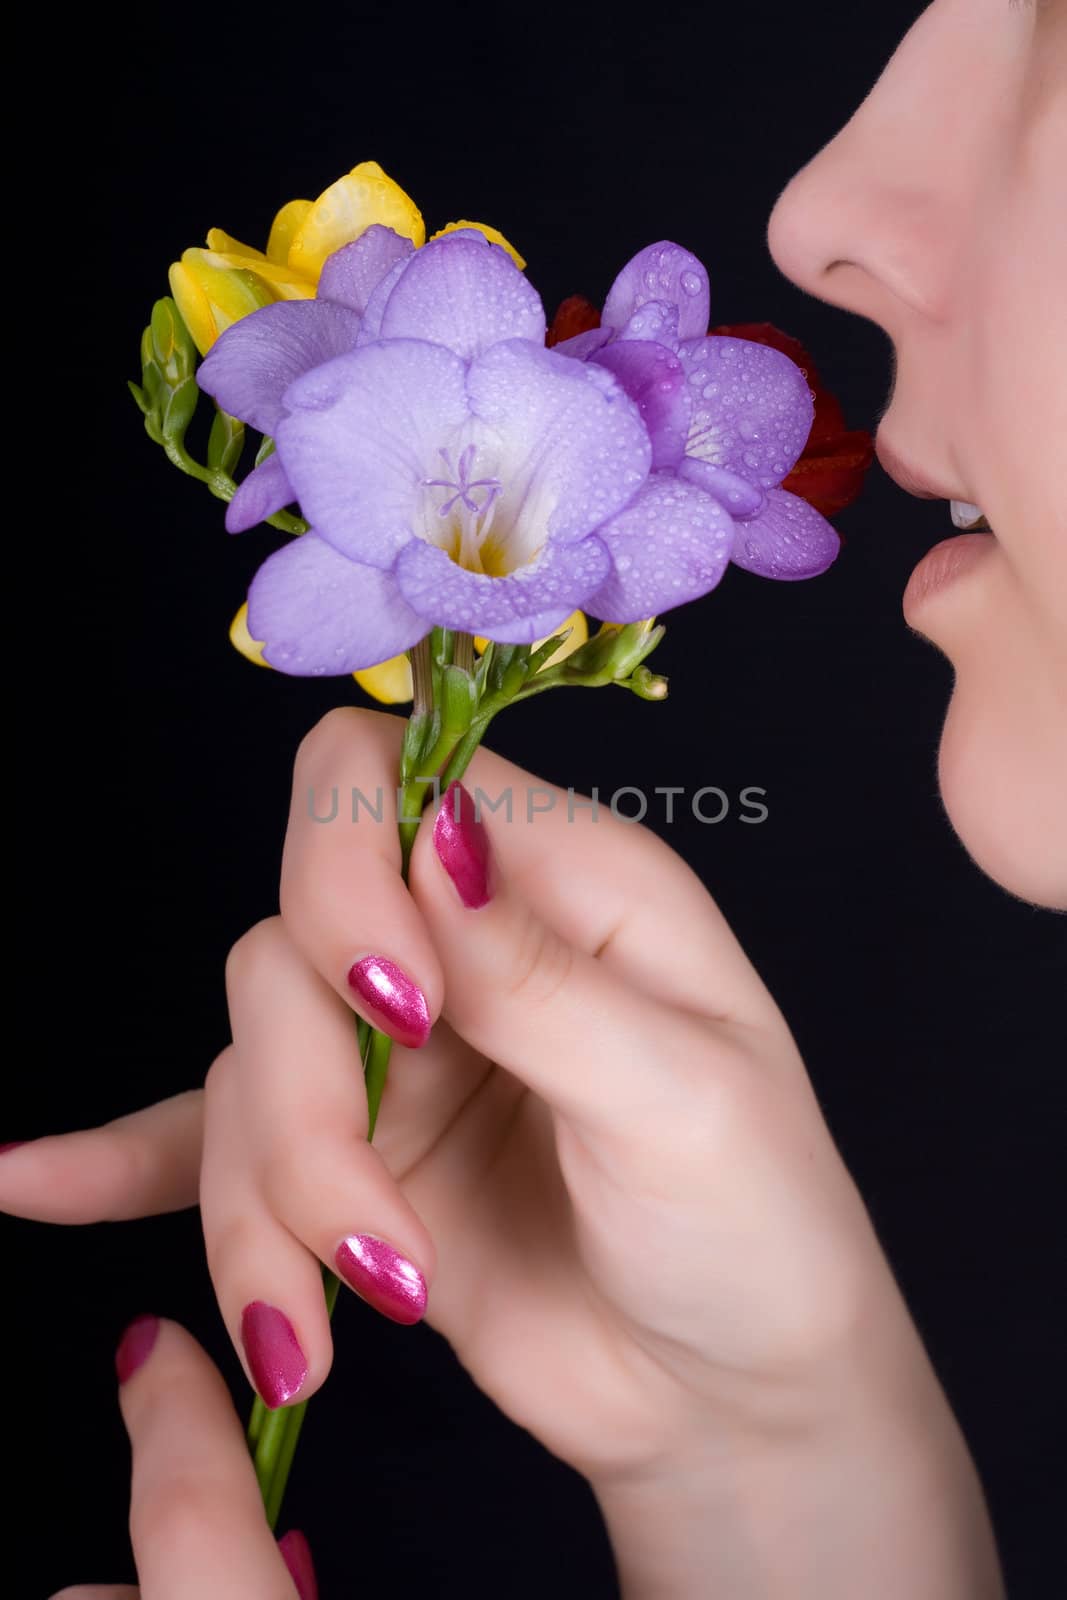 Woman sniffing flowers, freesia on a black background